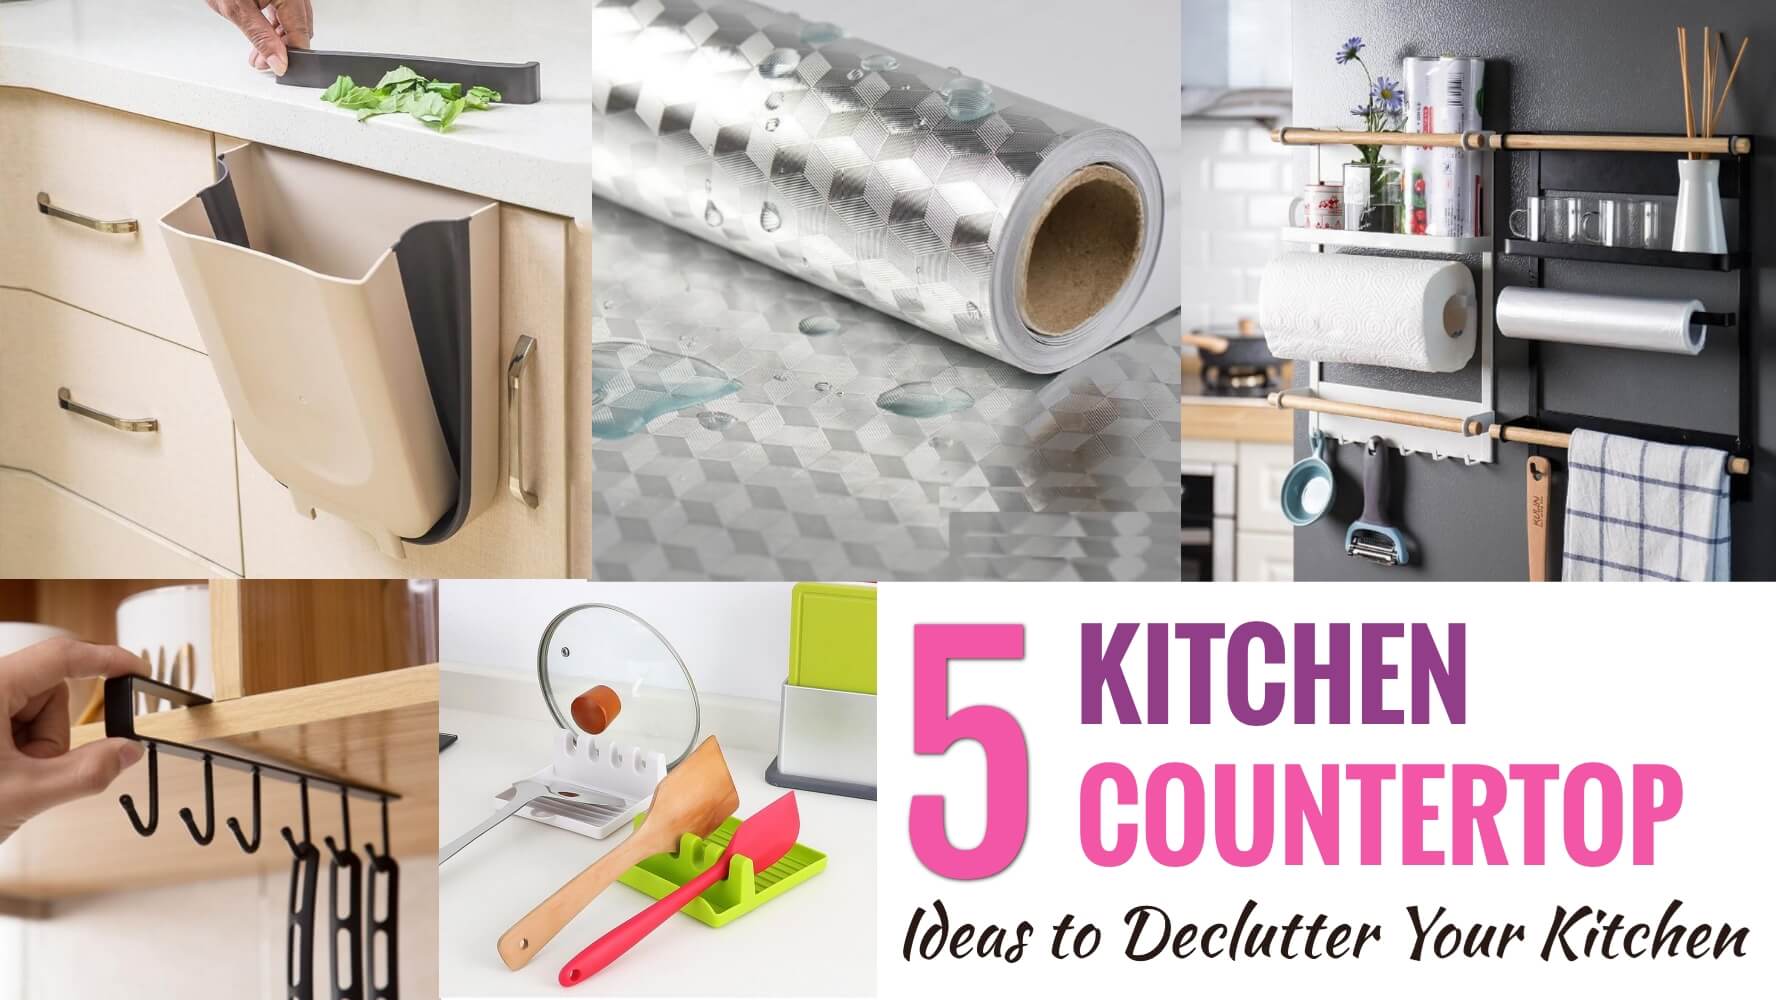 5 Kitchen Ideas for Organizing Your Countertop